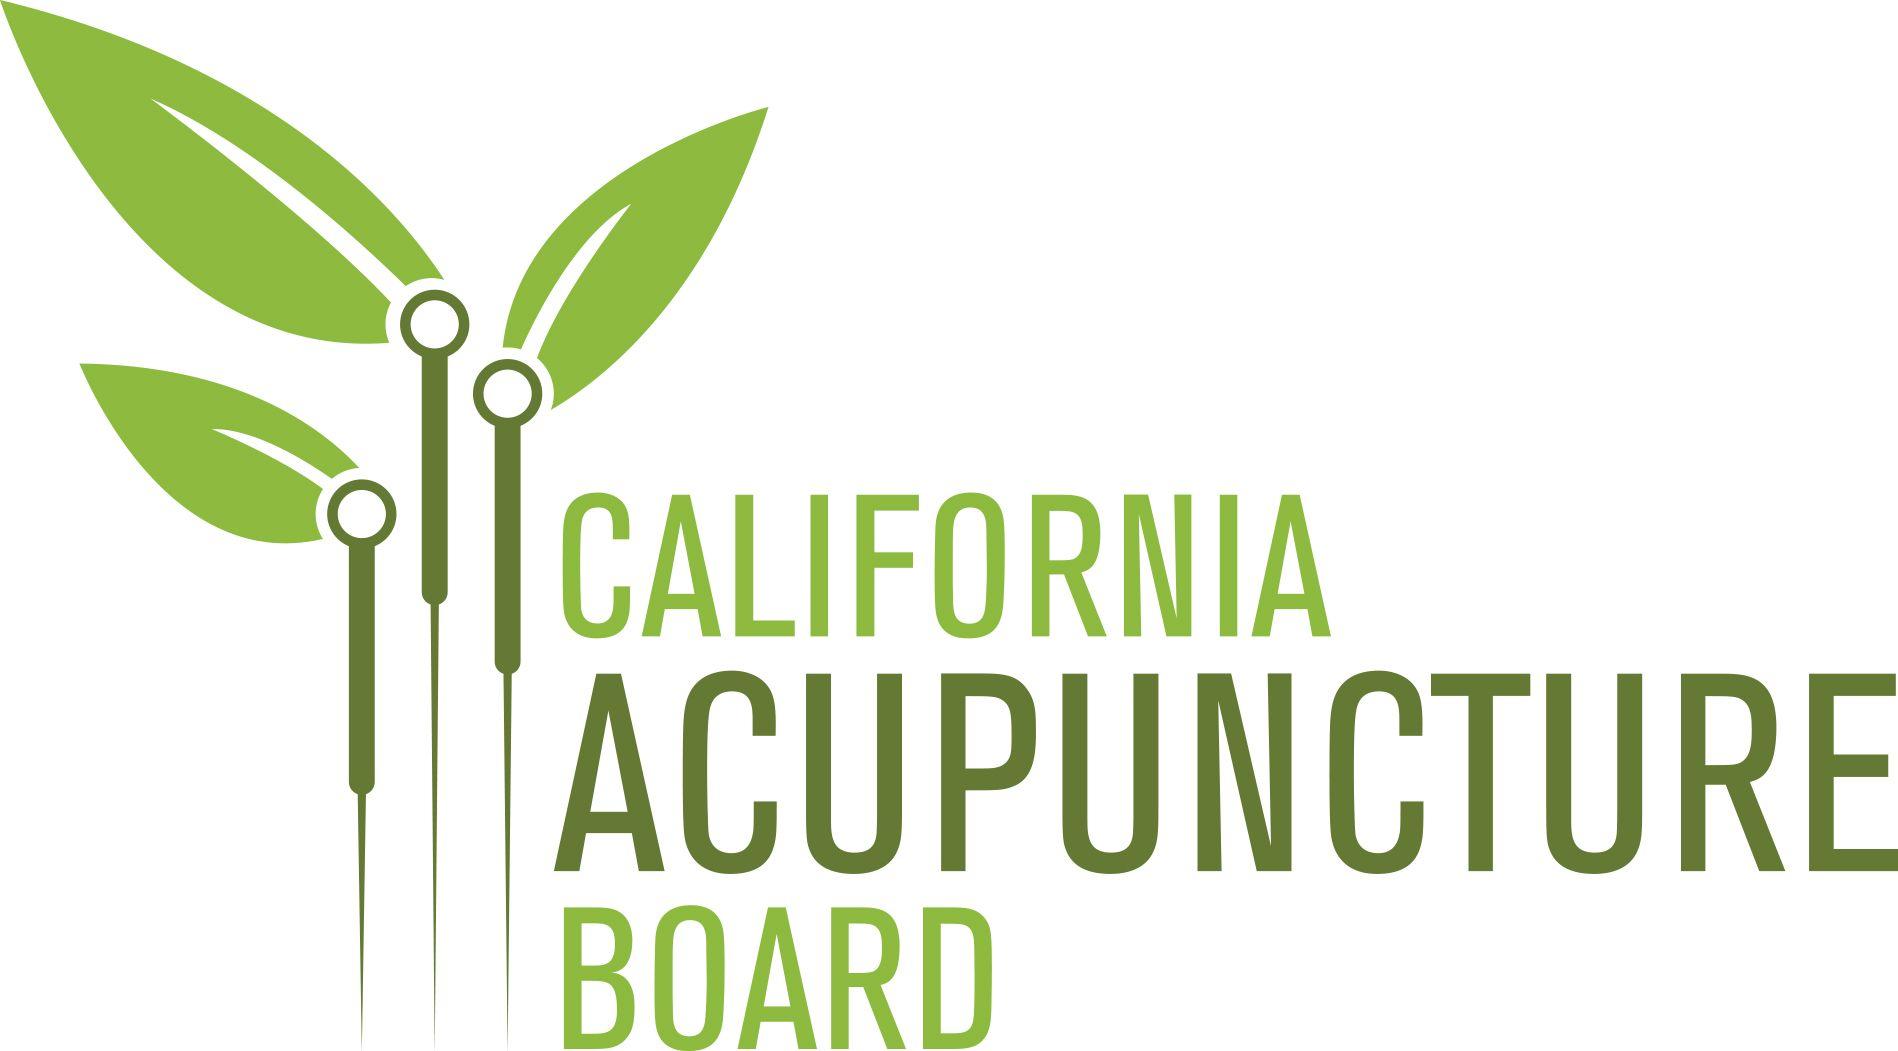 Acupuncture Logo - New Acupuncture Board Logo is on Point